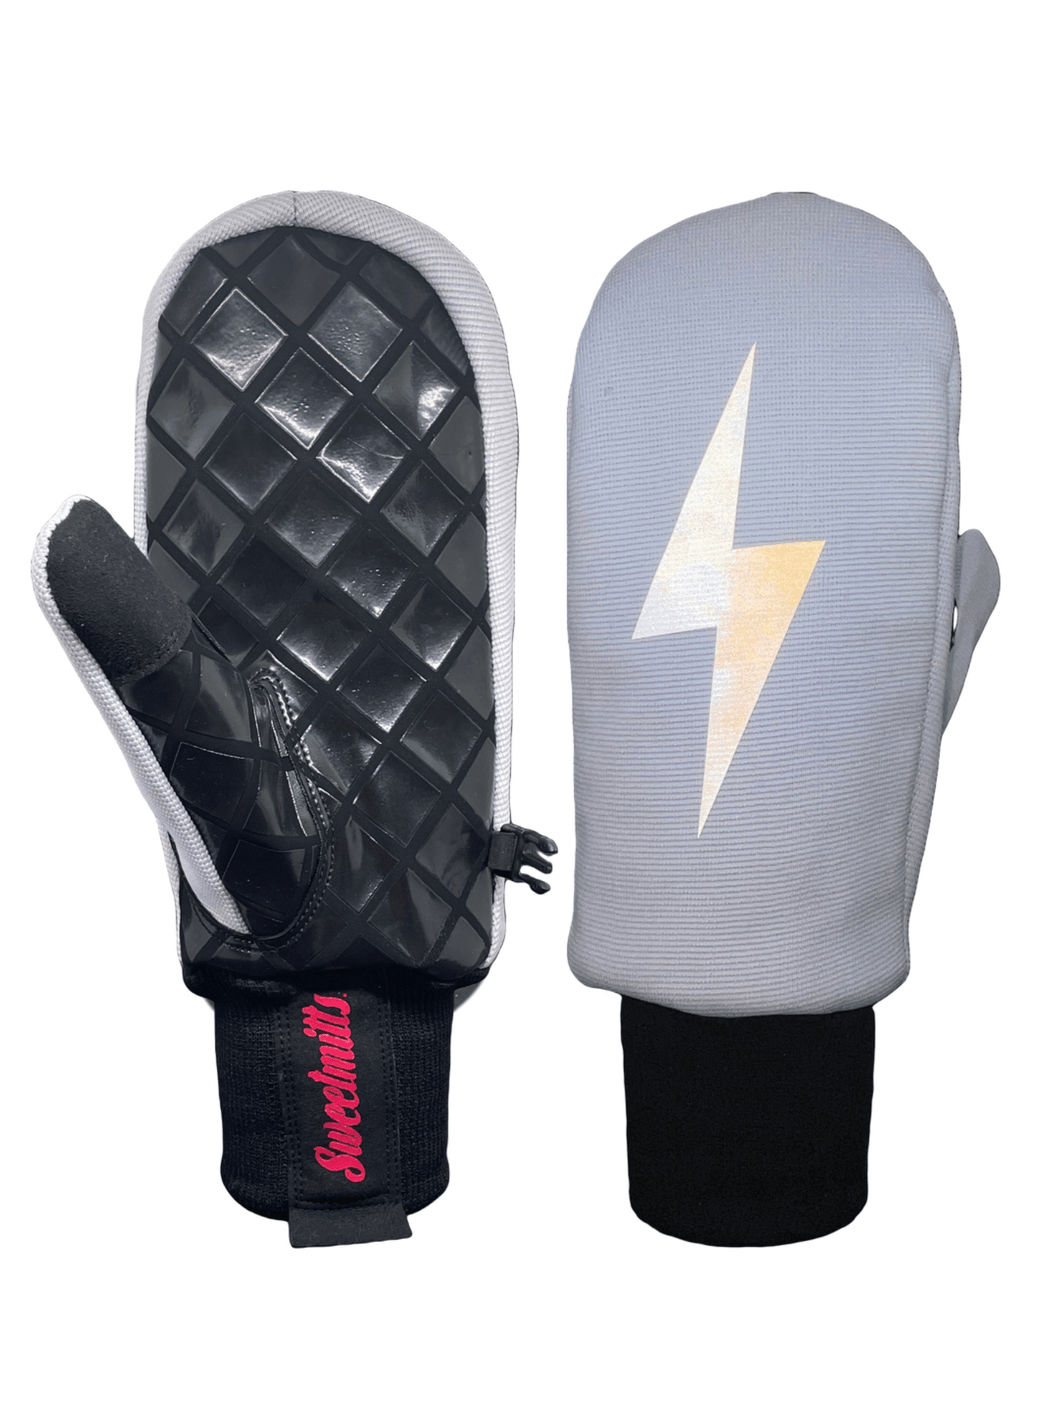 Sweetmitts Reflective Lightning Mitts